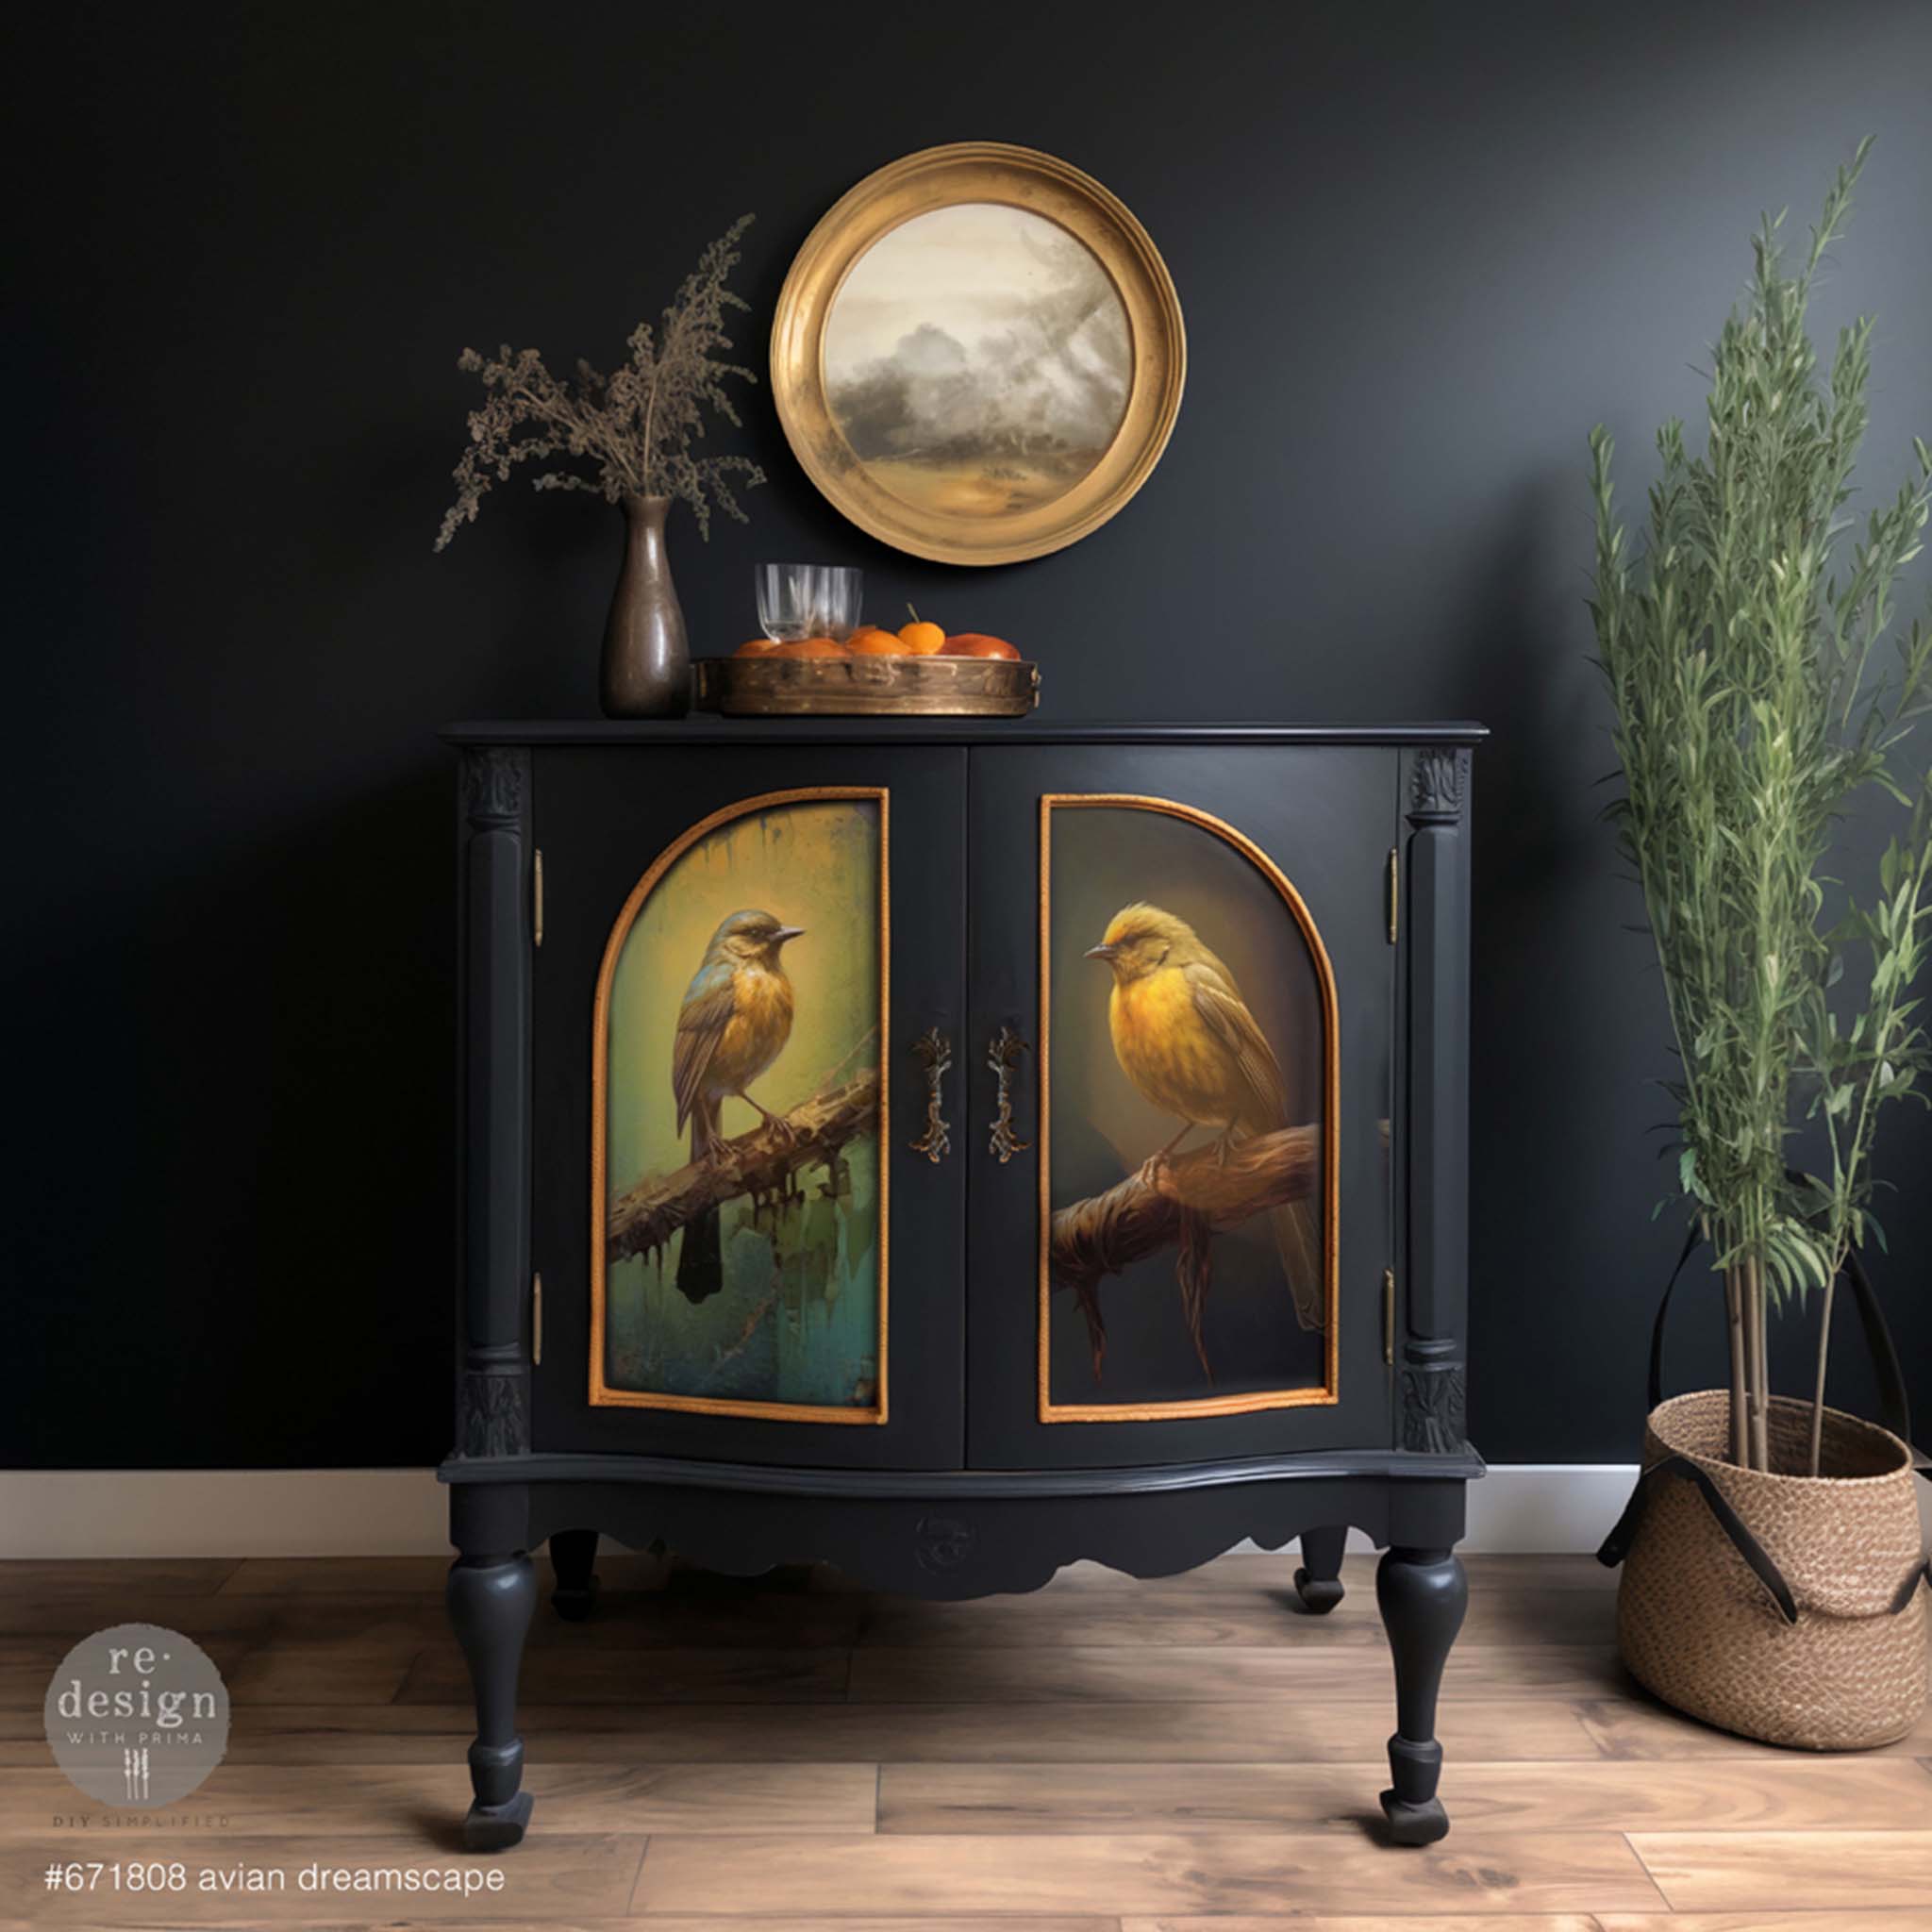 A vintage bar cabinet is painted dark blue and features ReDesign with Prima's Avian Dreamscape tissue paper on its 2 door inlays with gold trim.